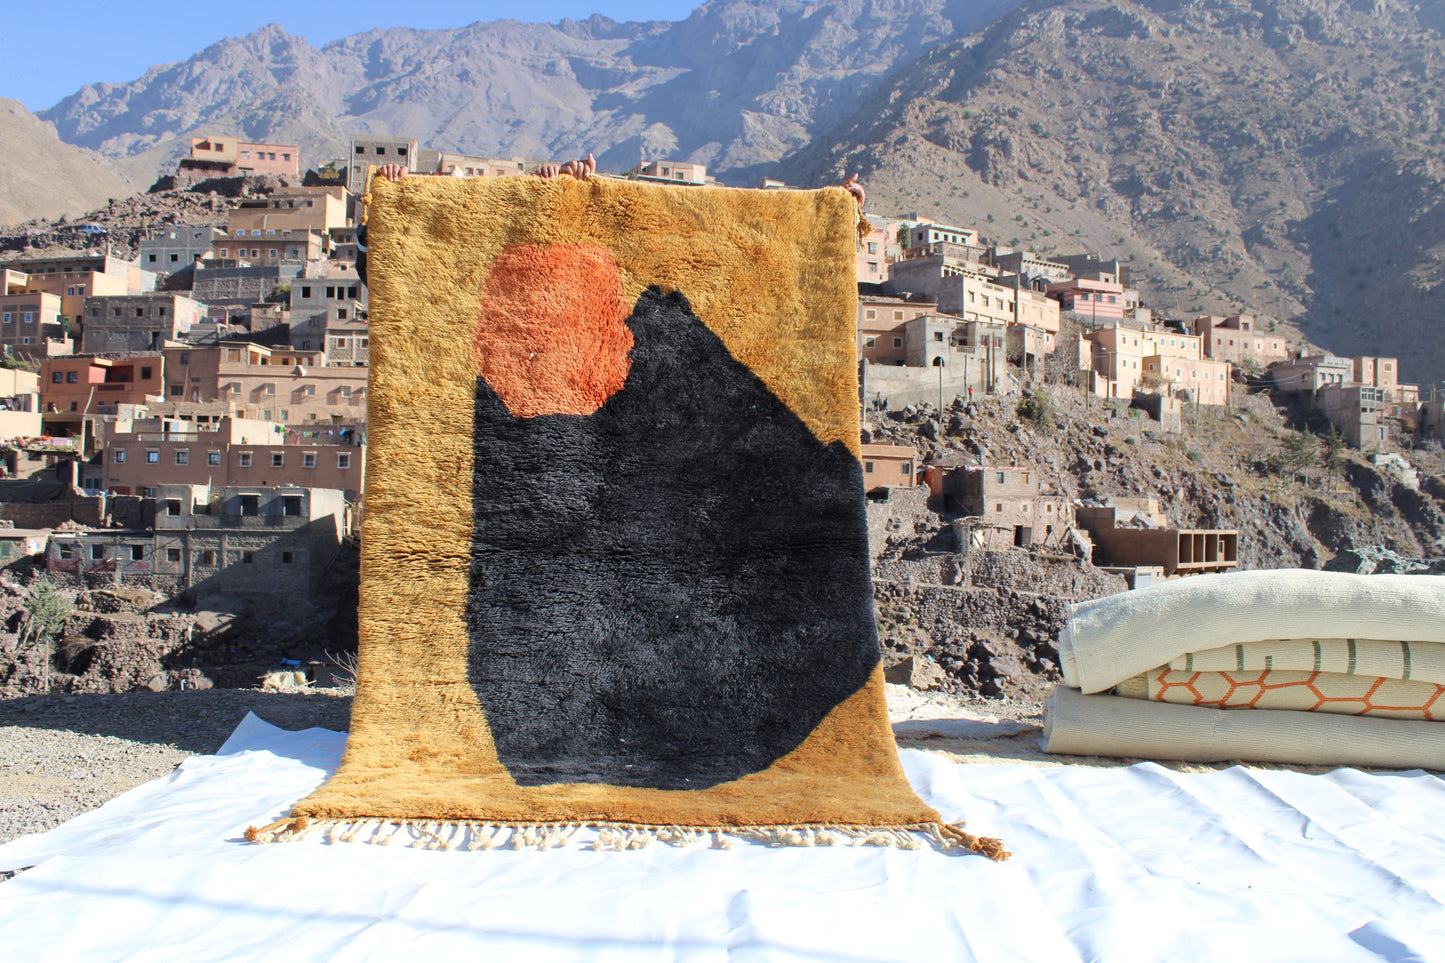 Beni Ourain rugs originate from the Atlas Mountains of Morocco and are characterized by their distinctive, neutral-toned, and geometric designs. These handwoven rugs often feature a plush pile and are made by the Berber tribes,  size is 240x150 cm